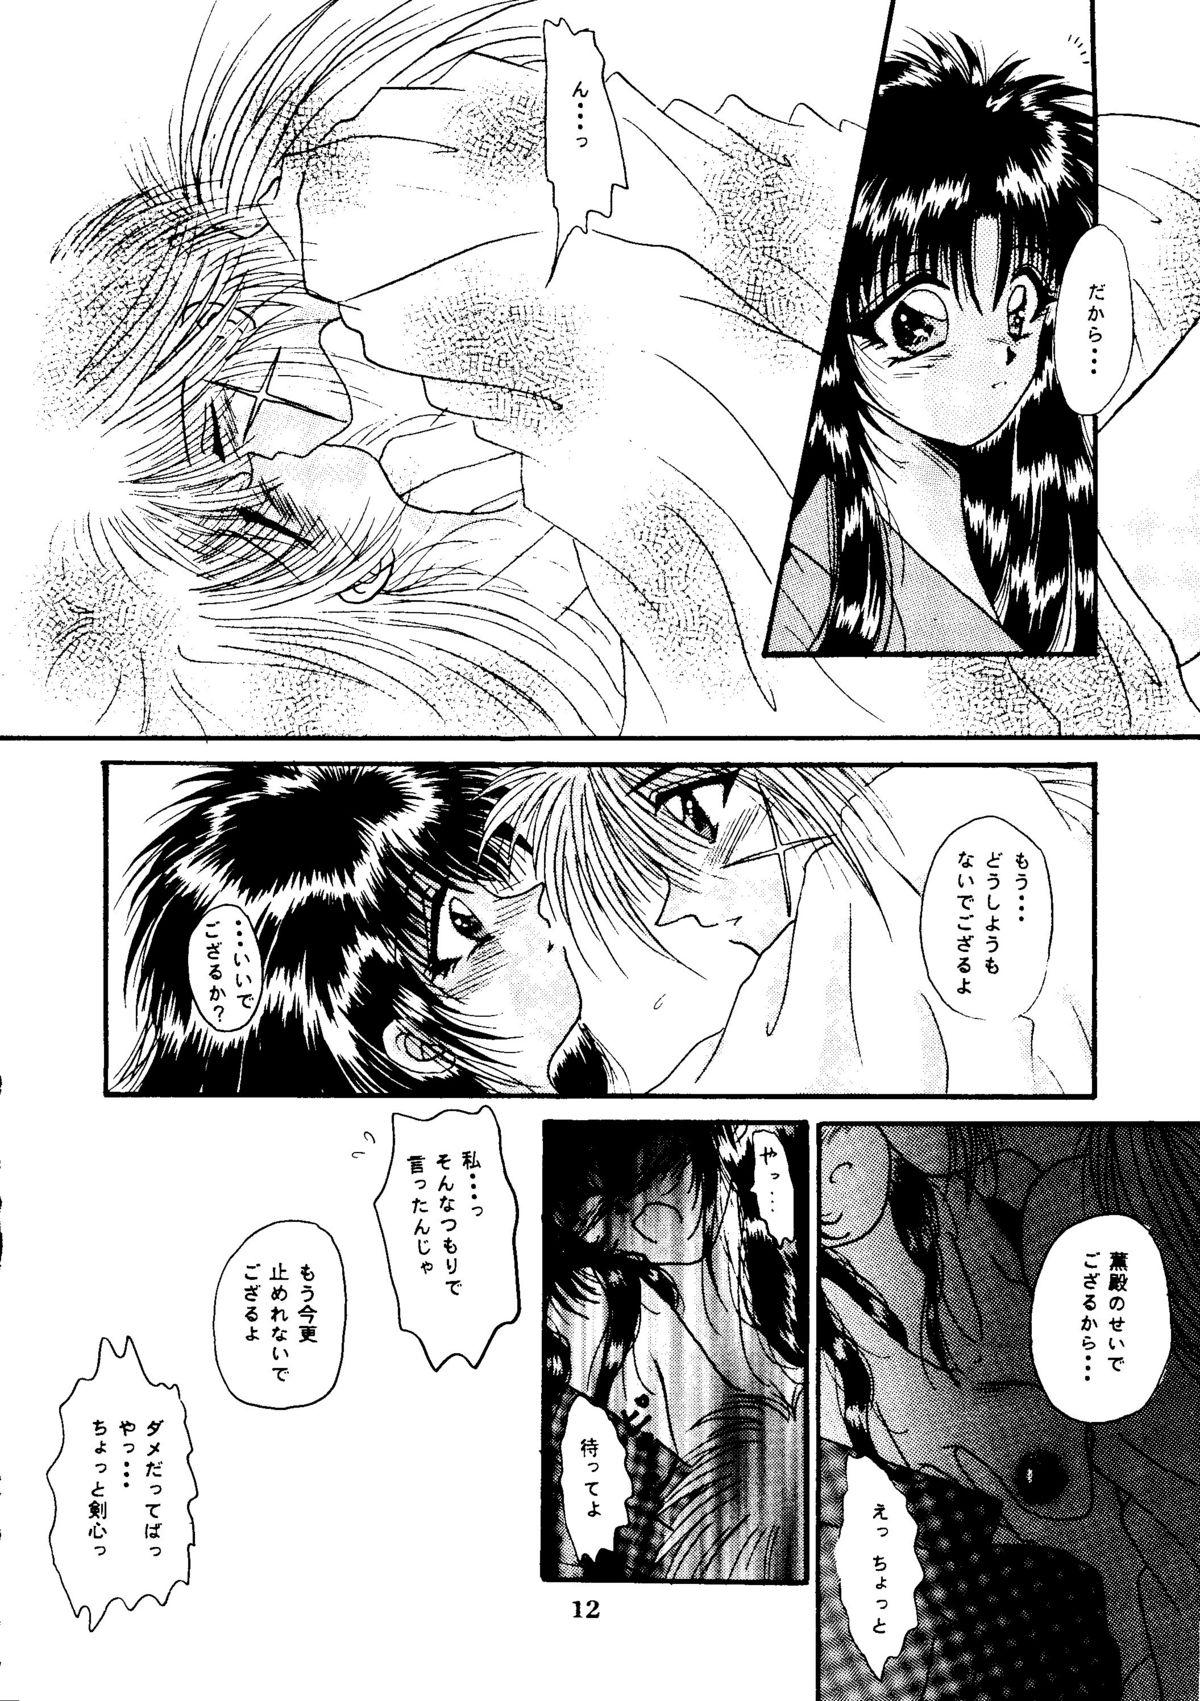 Cameltoe I Believe... - Rurouni kenshin Submission - Page 11